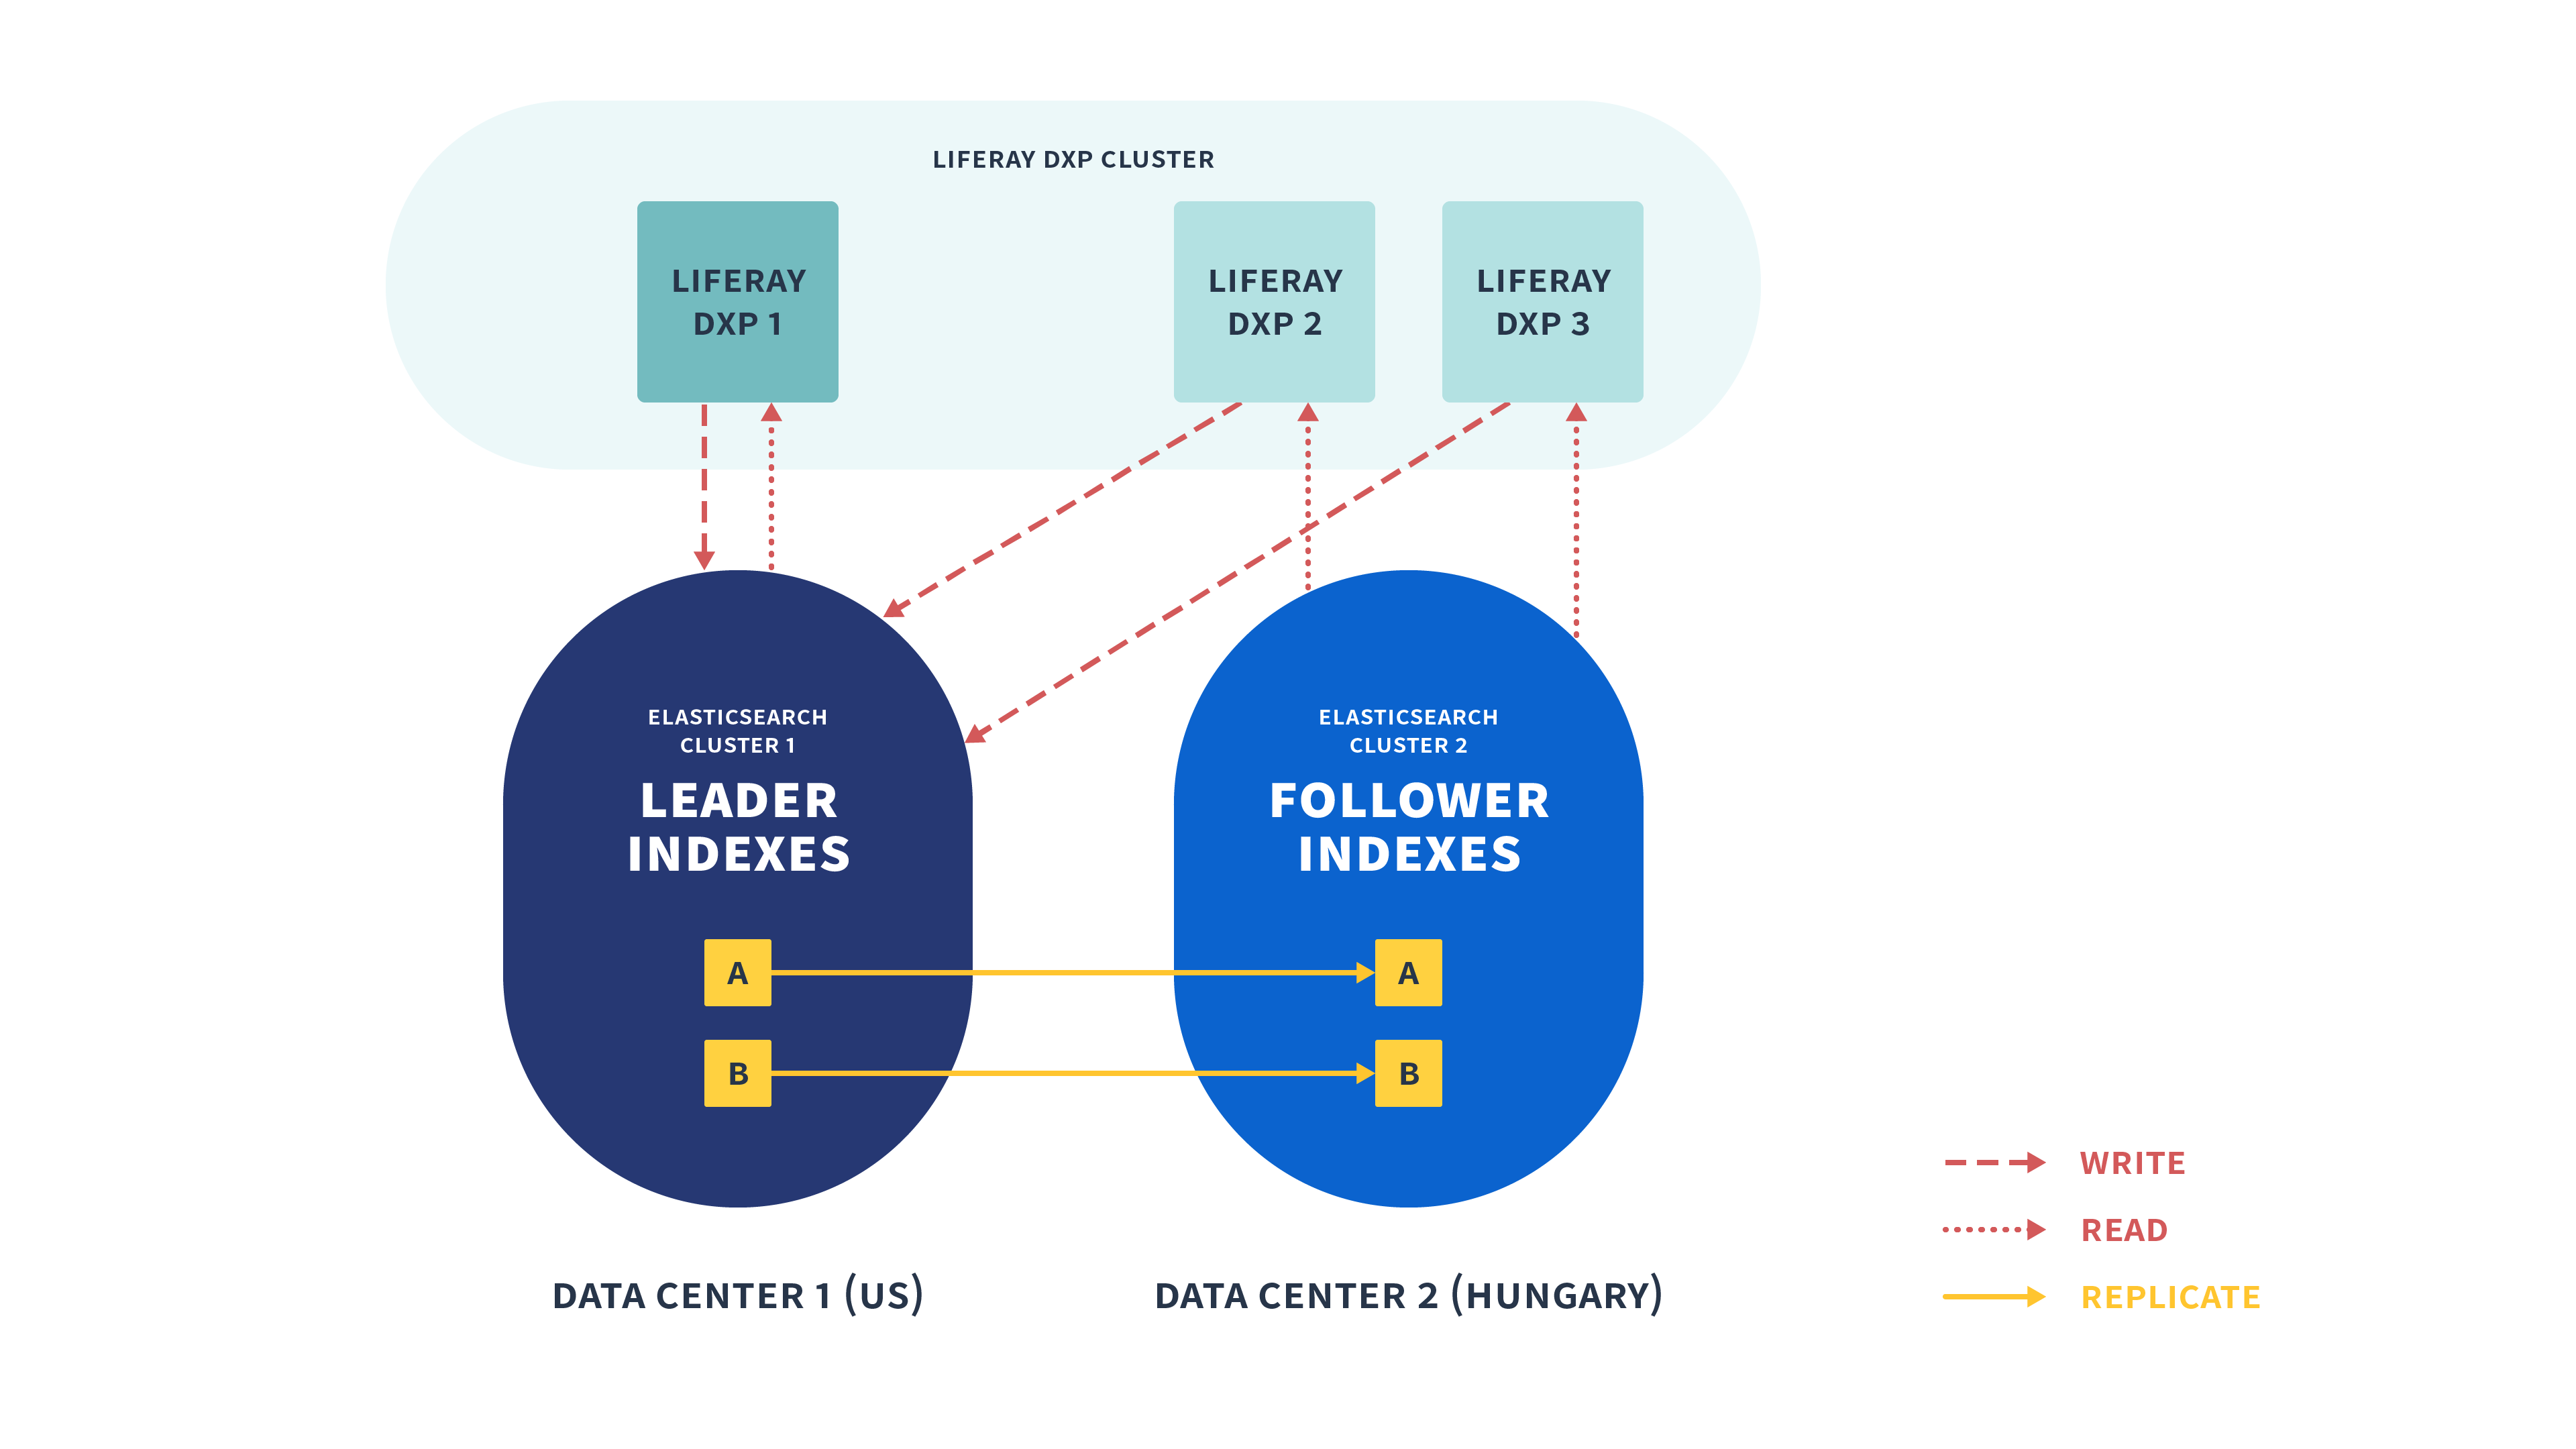 With Cross-Cluster Replication, disparate data centers can hold synchronized Elasticsearch clusters with Liferay DXP indexes.